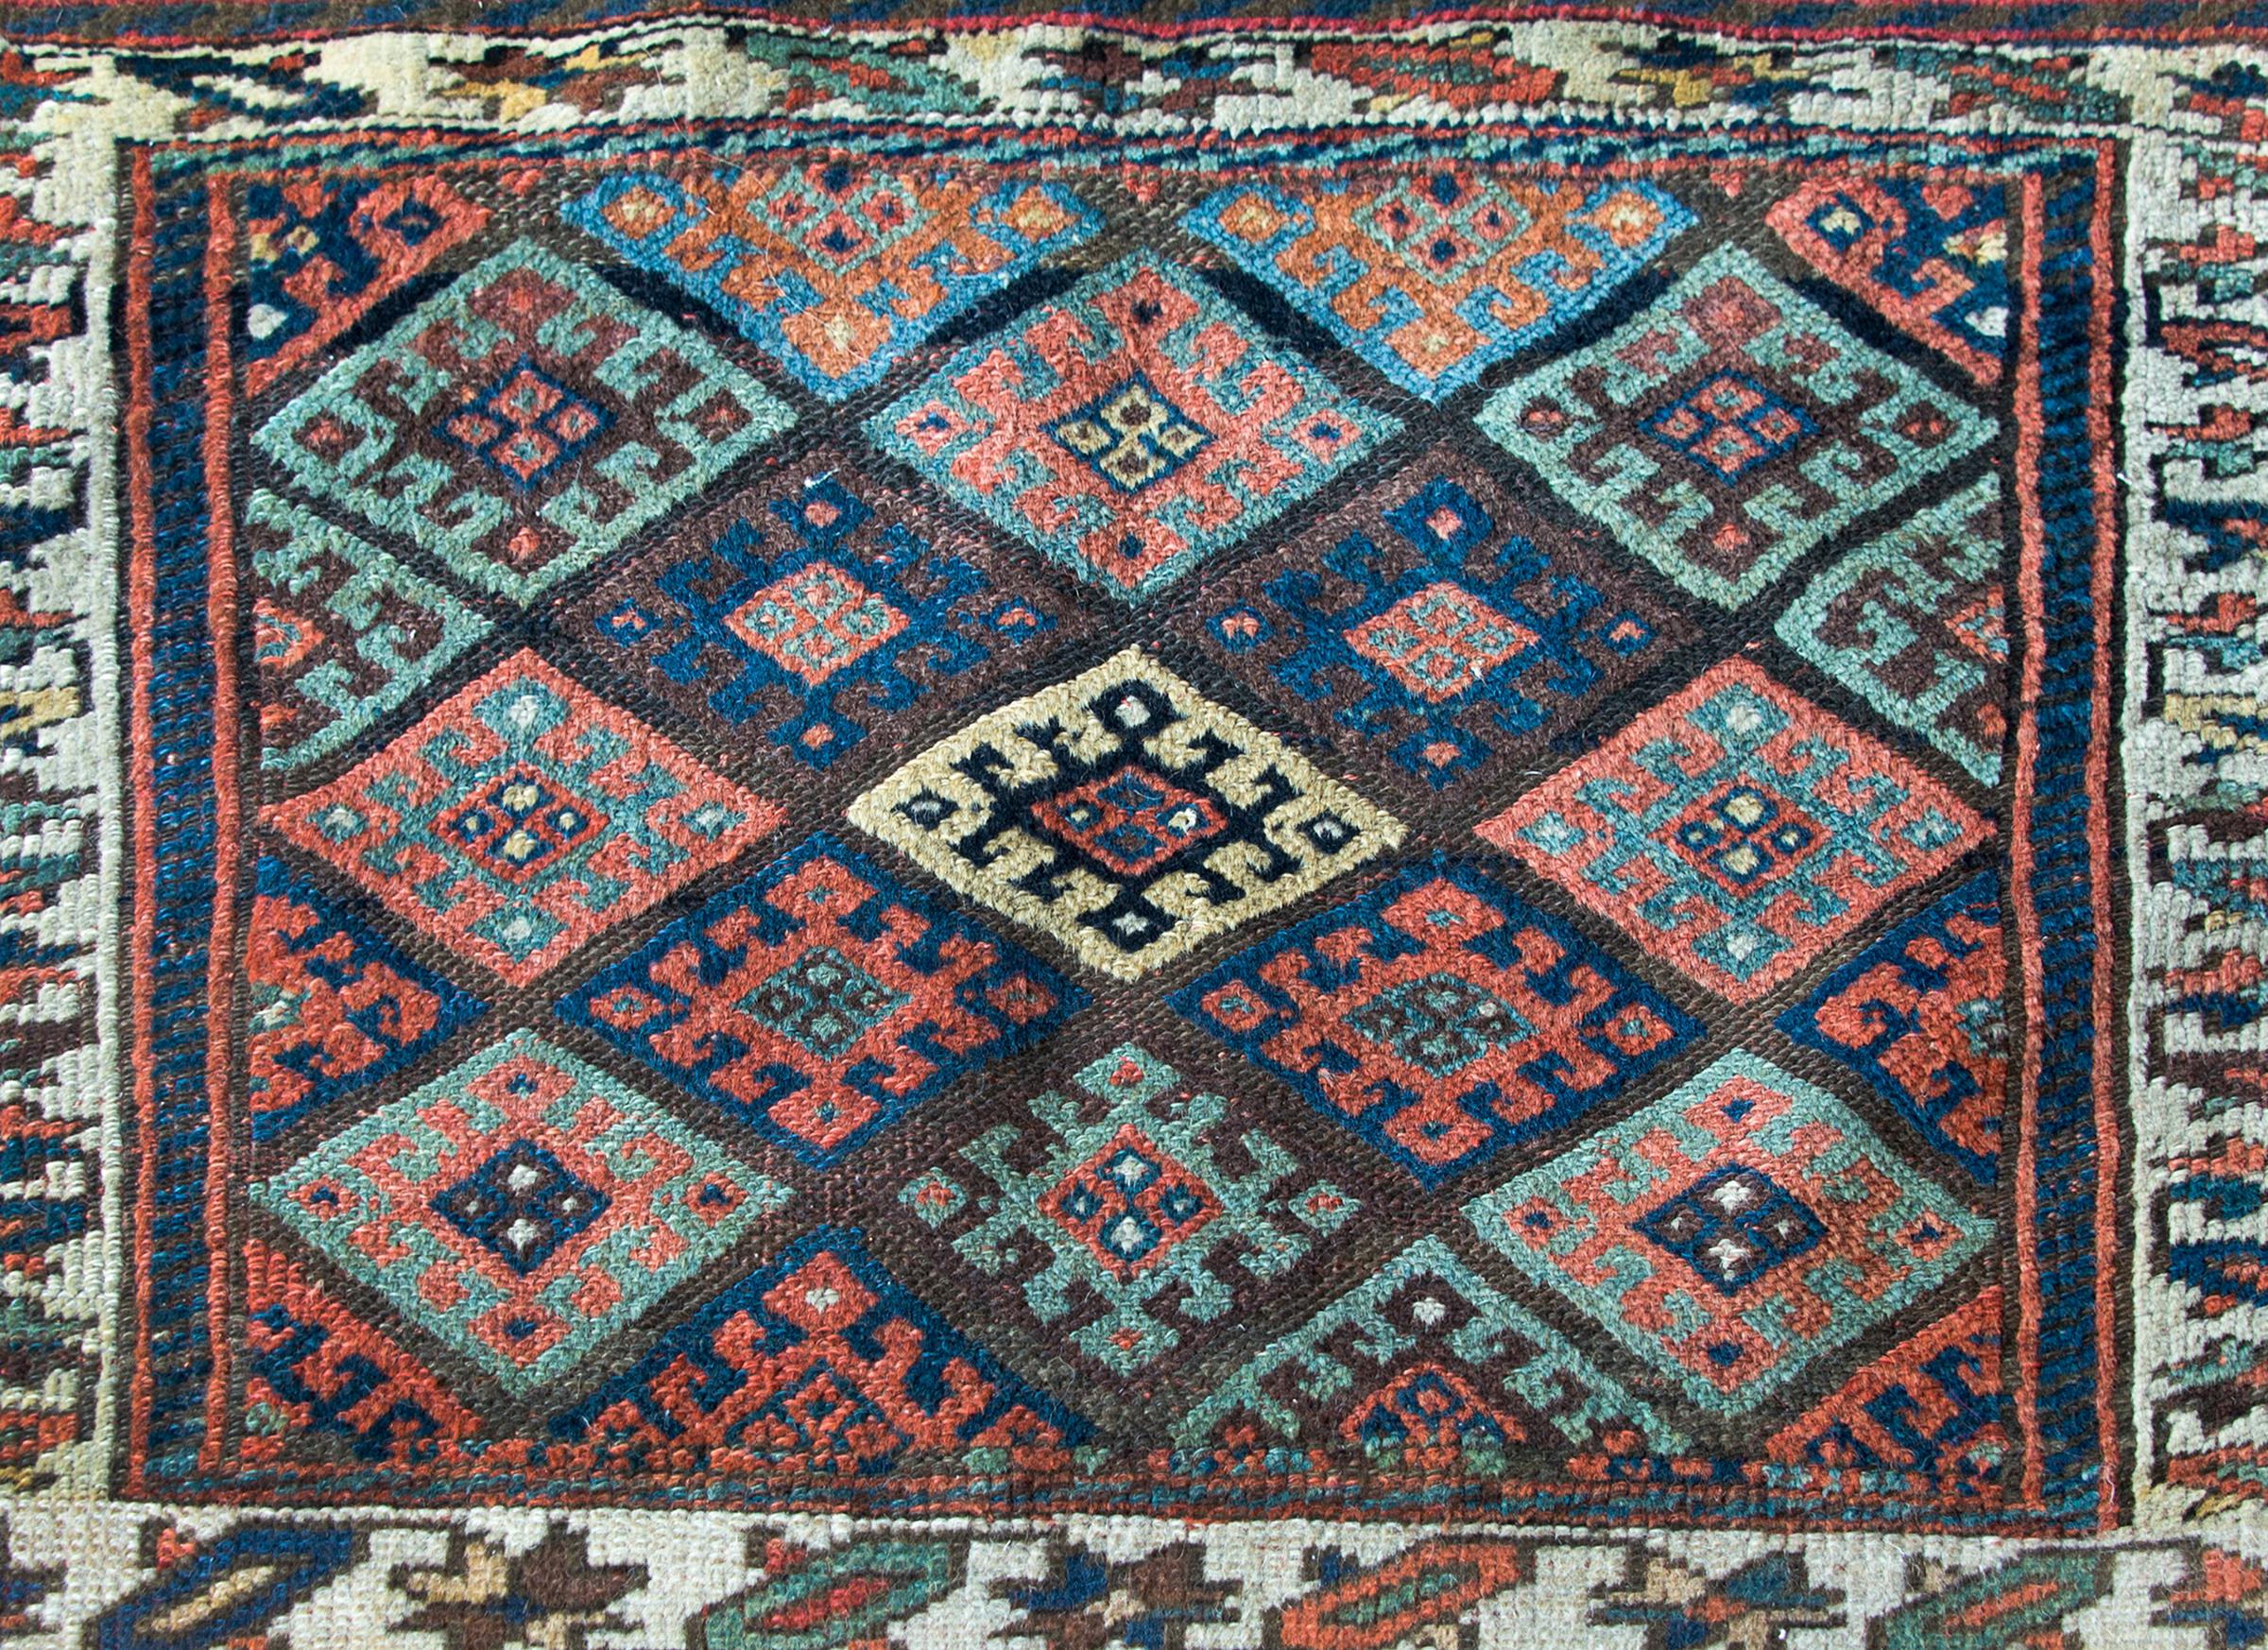 A wonderful early 20th century Kurdish Jaffe rug with a central field with several multi-colored stylized floral patterns, surrounded by a thin border of more stylized flowers, and all woven in crimson, green, indigo, and natural brown wool.